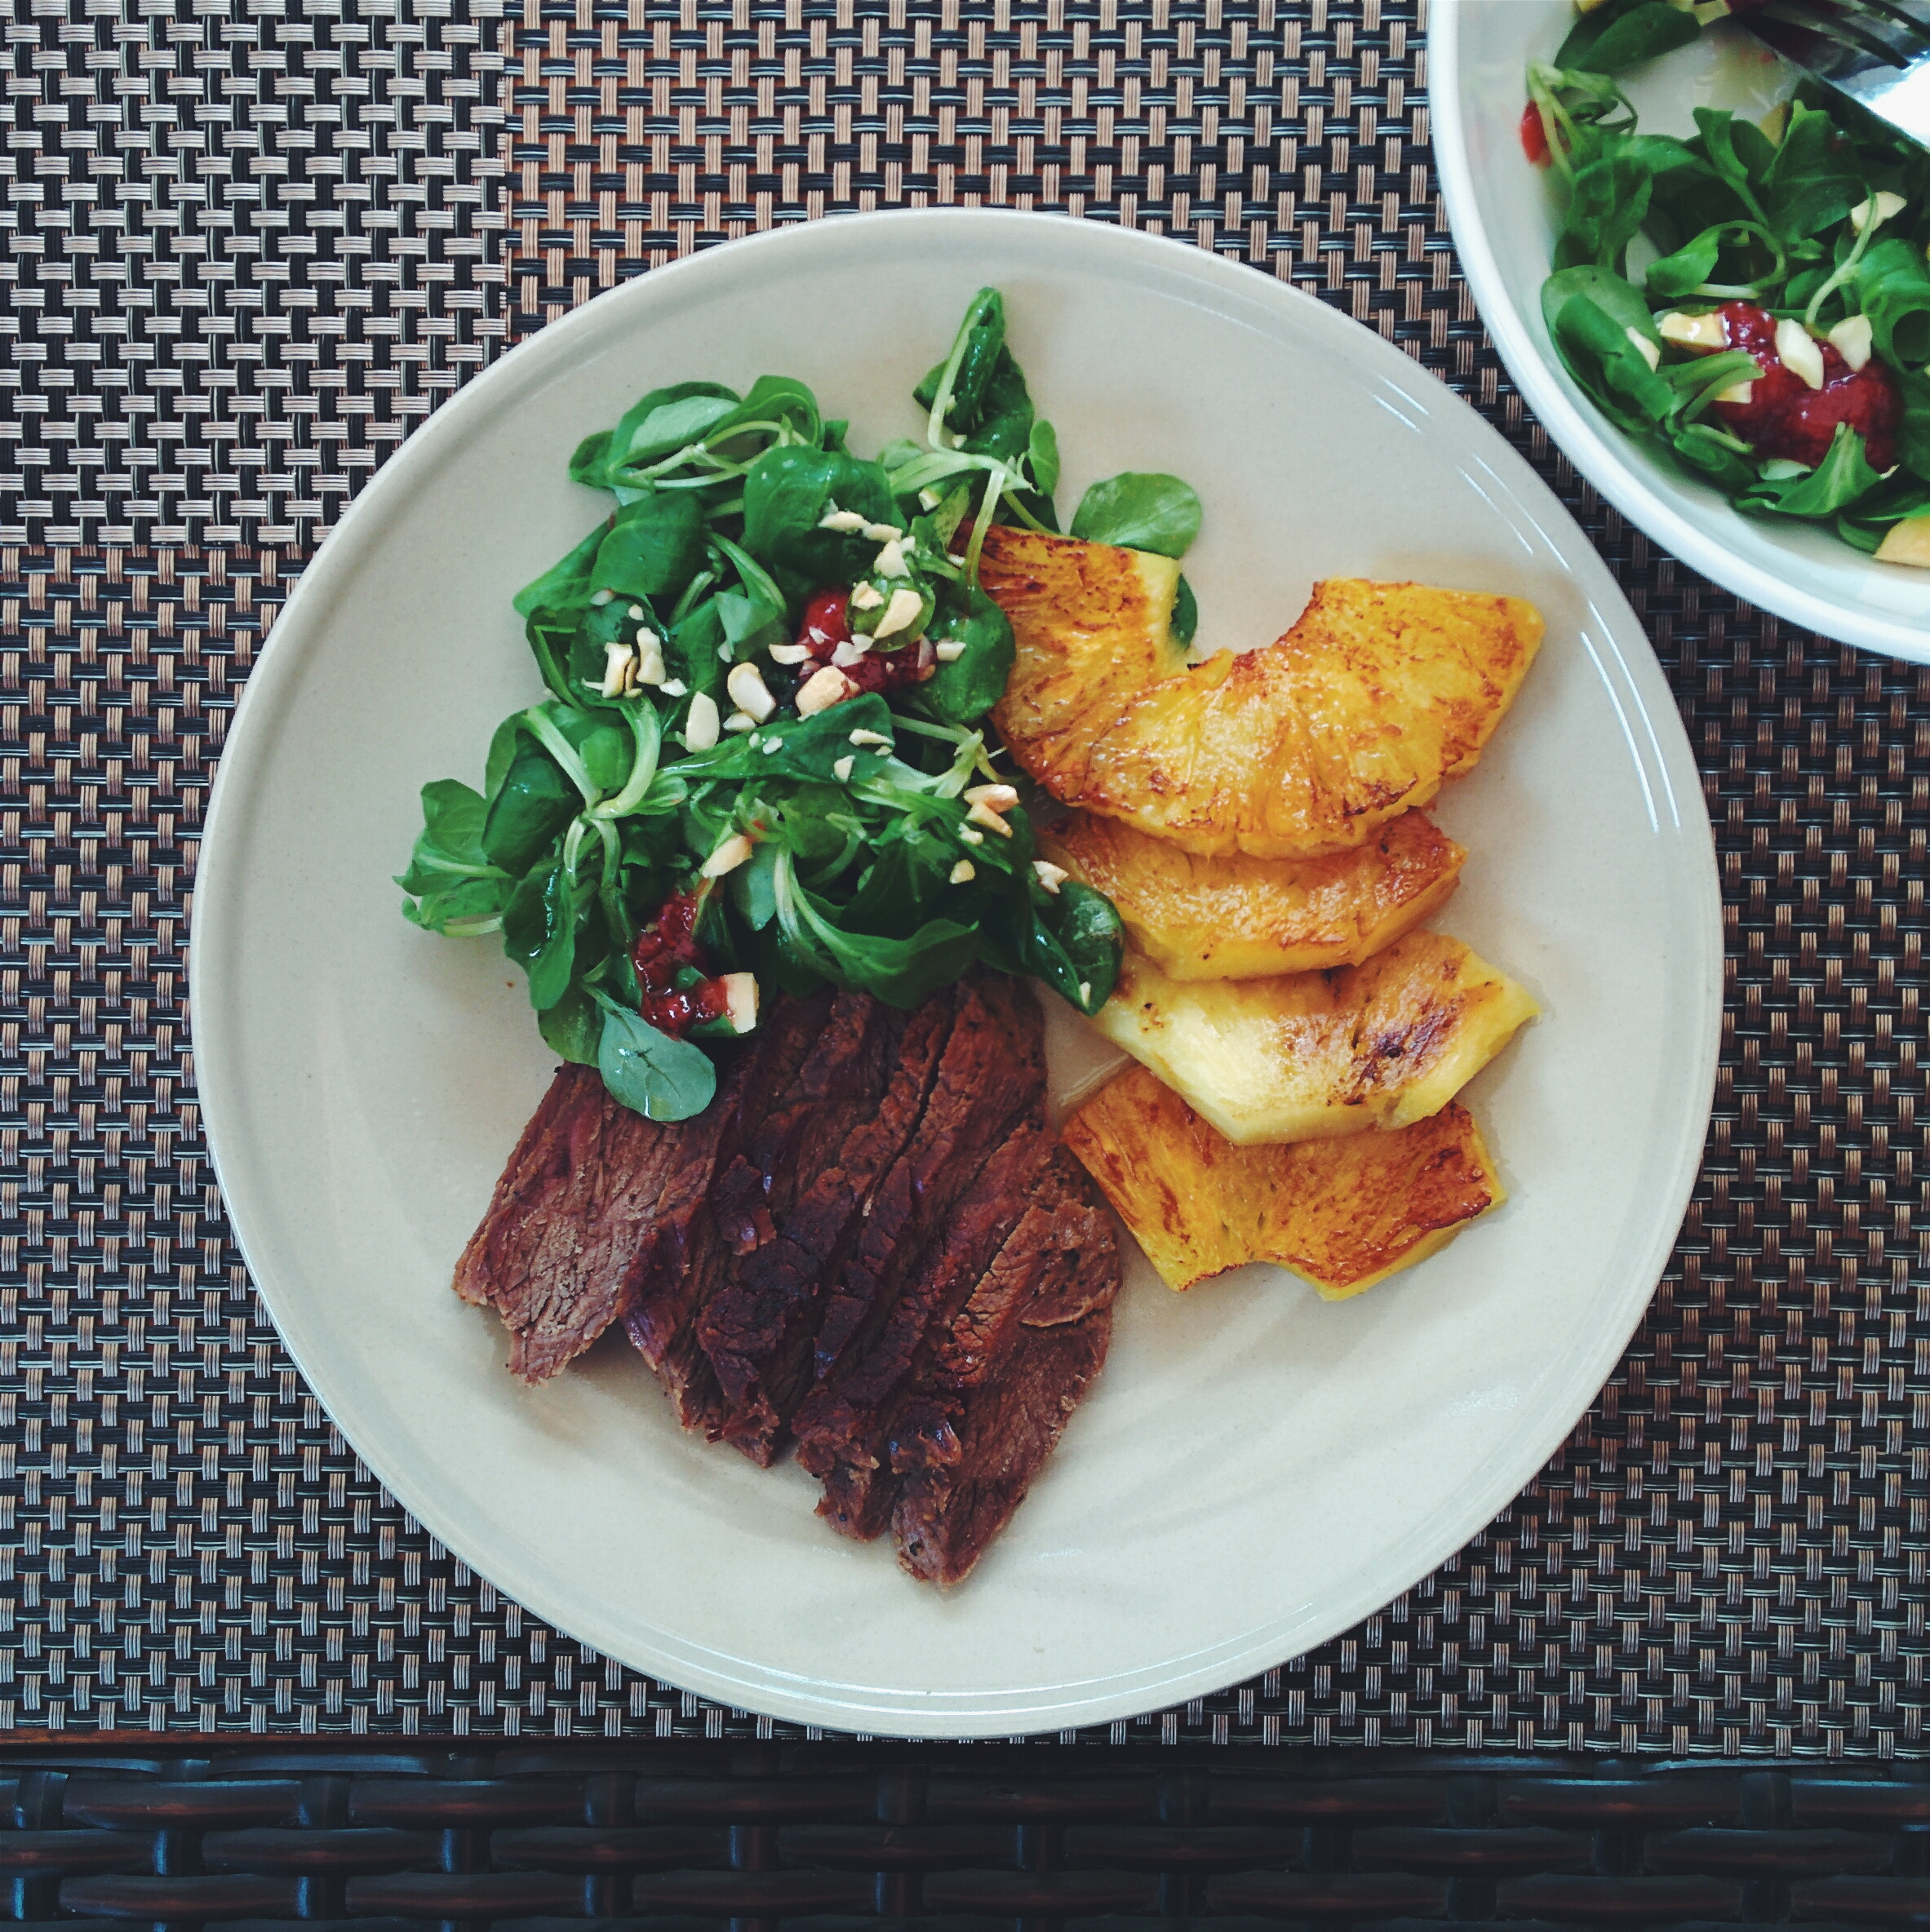 Roastbeef with grilled pineapple and greens by Jakub Kapusnak